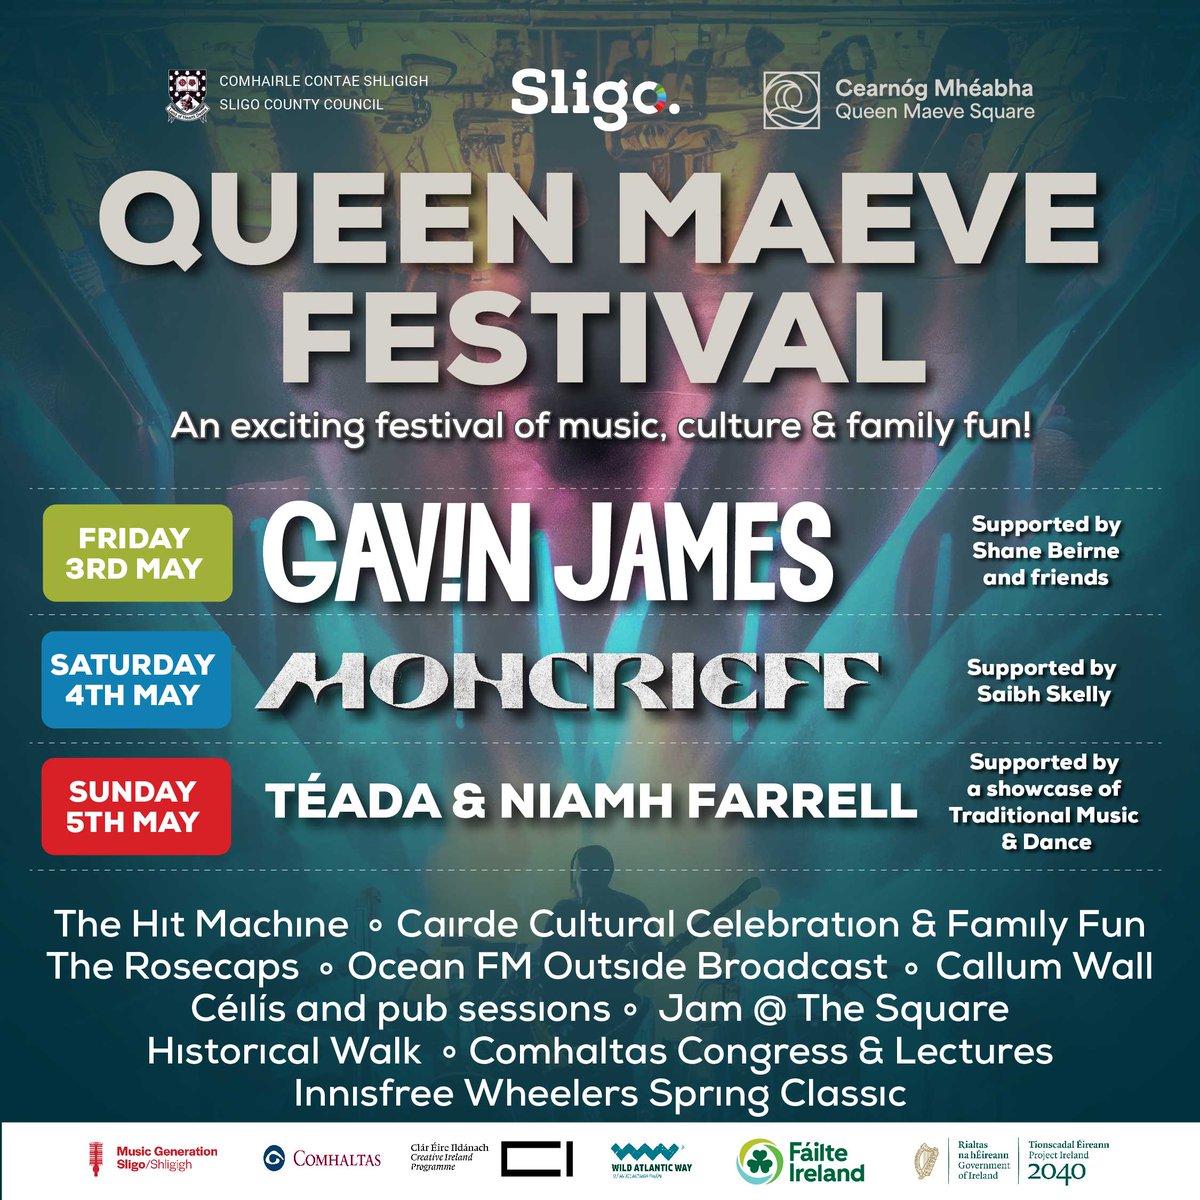 Check out the full line up for 𝑸𝒖𝒆𝒆𝒏 𝑴𝒂𝒆𝒗𝒆 𝑭𝒆𝒔𝒕𝒊𝒗𝒂𝒍! 😍 We can't wait to welcome you all to Sligo in May! 🎶 🗓️ Friday 3rd May - Sunday 5th May 📍 Queen Maeve Square, Sligo #Queenmaevefestival #SligoLiveInvestVisit #VisitSligo #Sligo #WildAtlanticWay